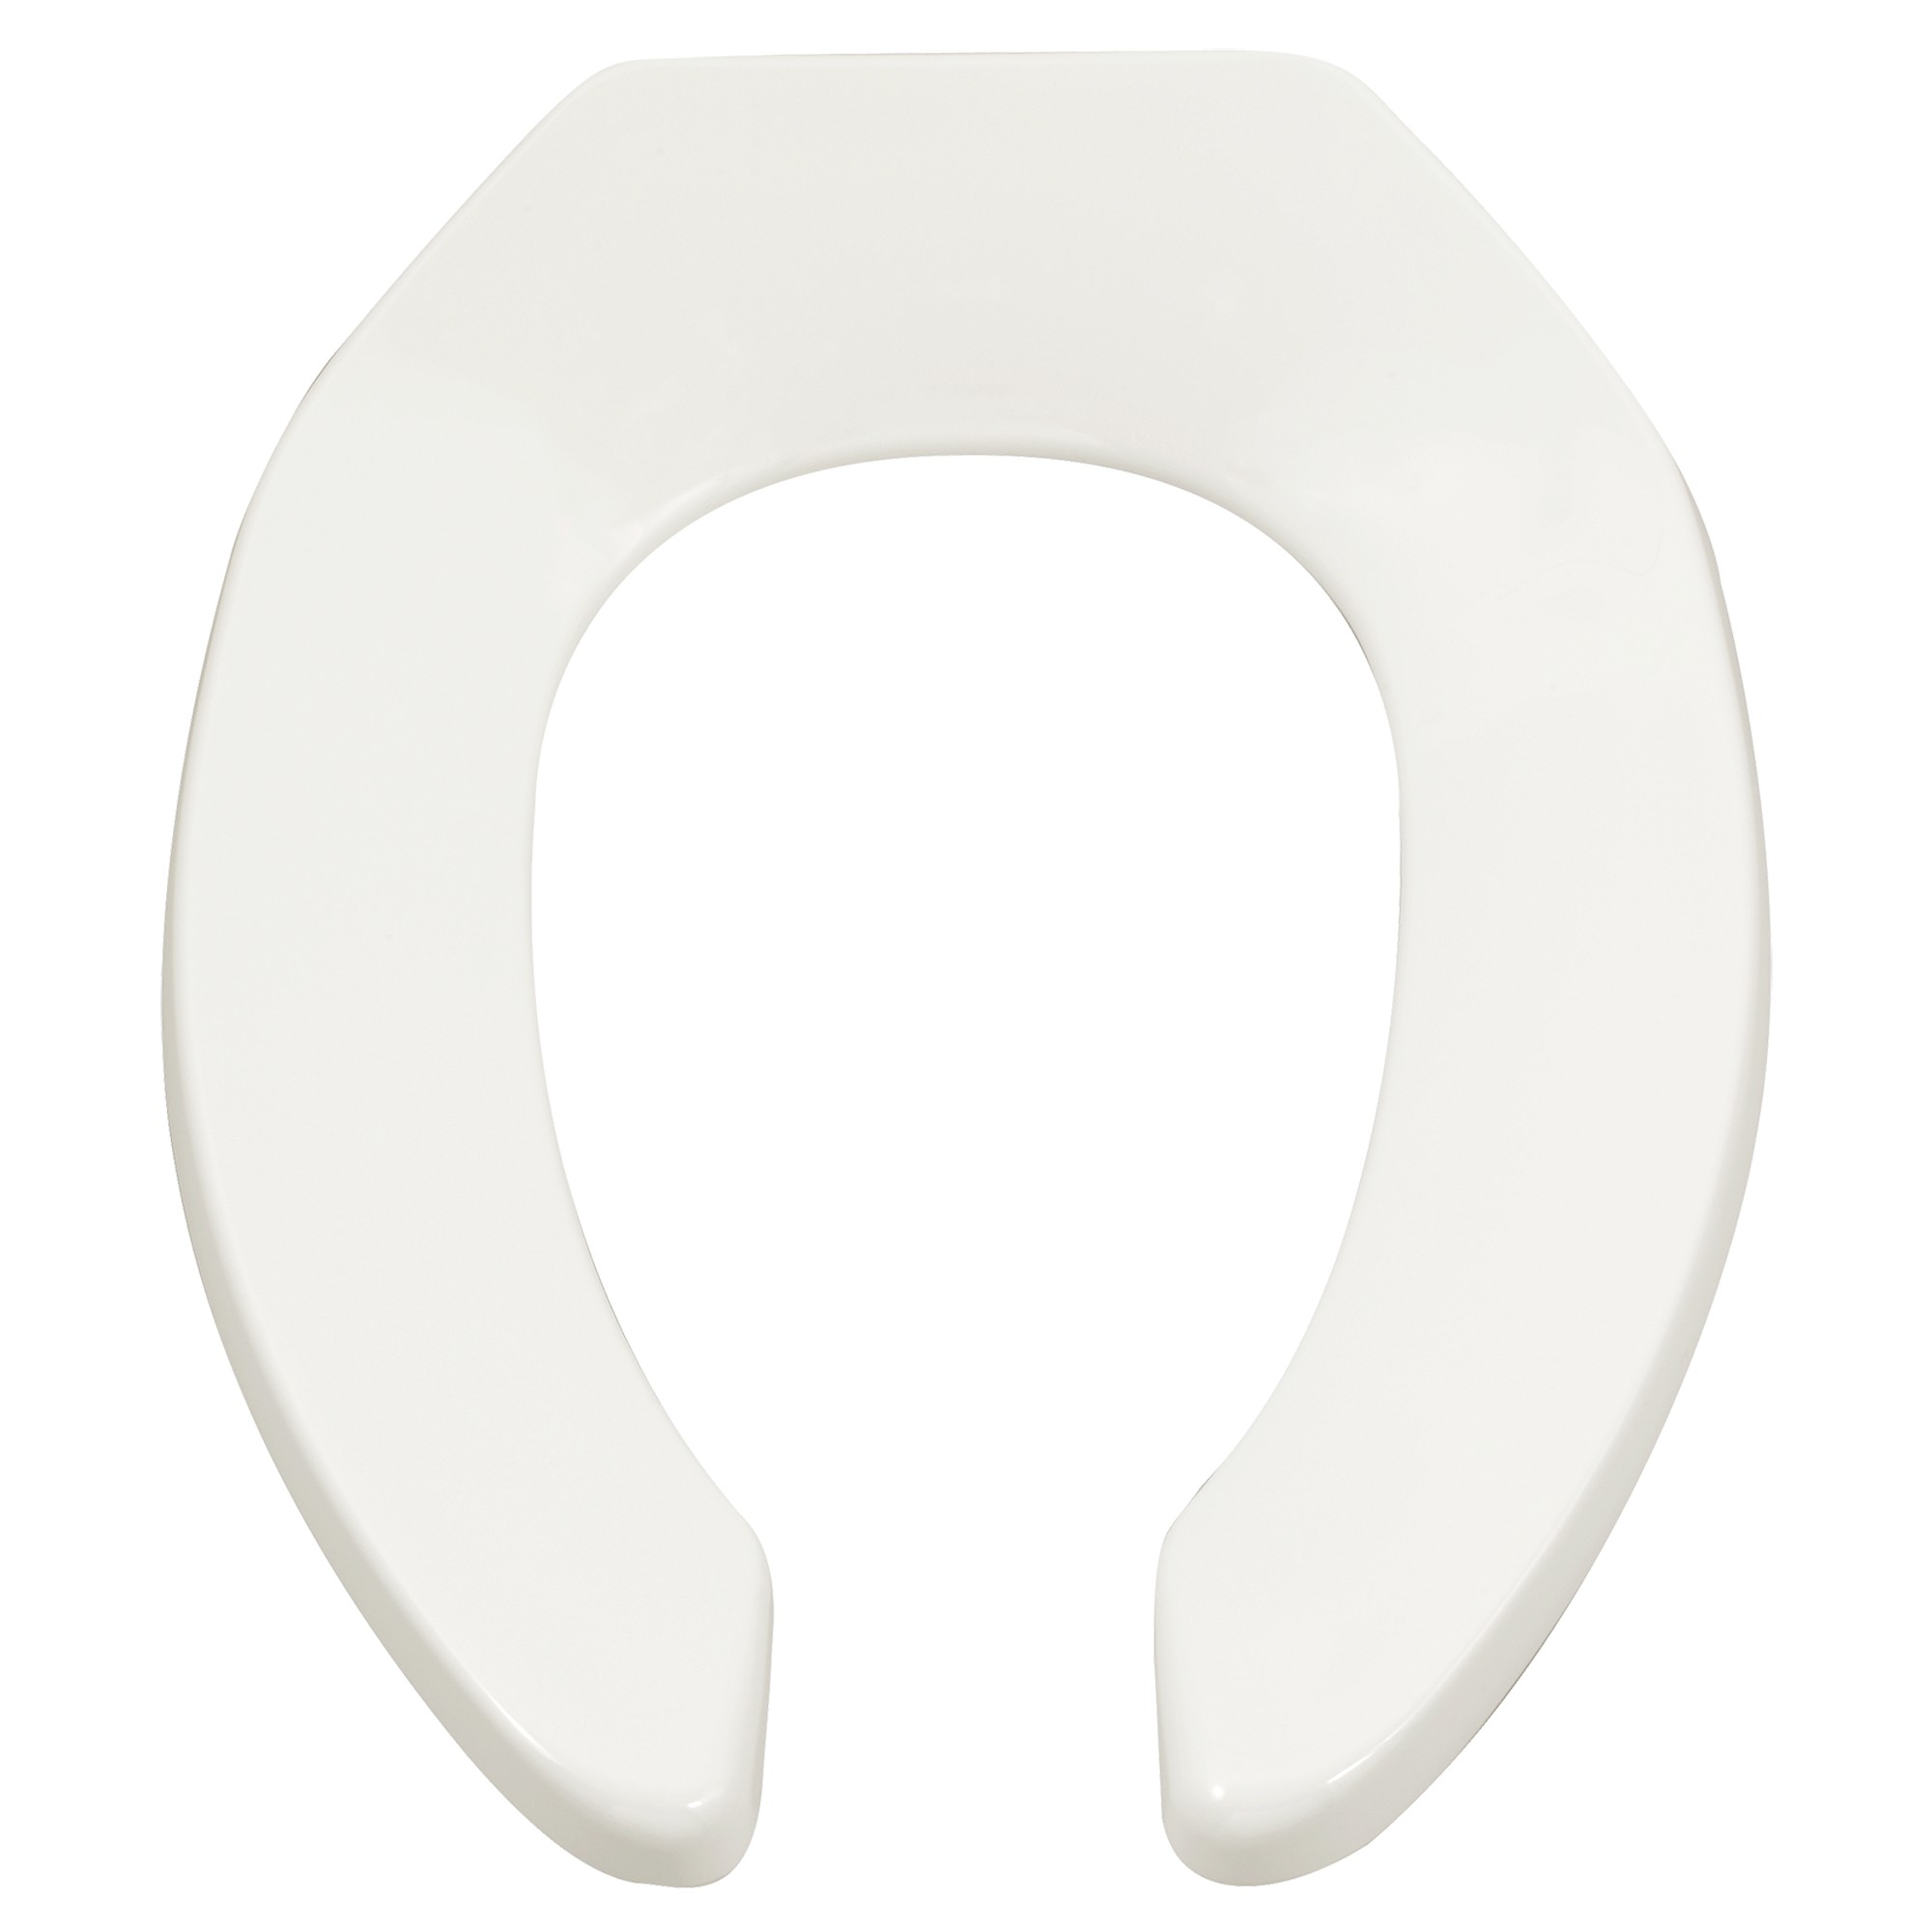 American Standard | 5901.100.020 | AMERICAN STANDARD 5901.100 COMMERCIAL ELONGATED OPEN-FRONT SEAT 020 WHITE LESS COVER